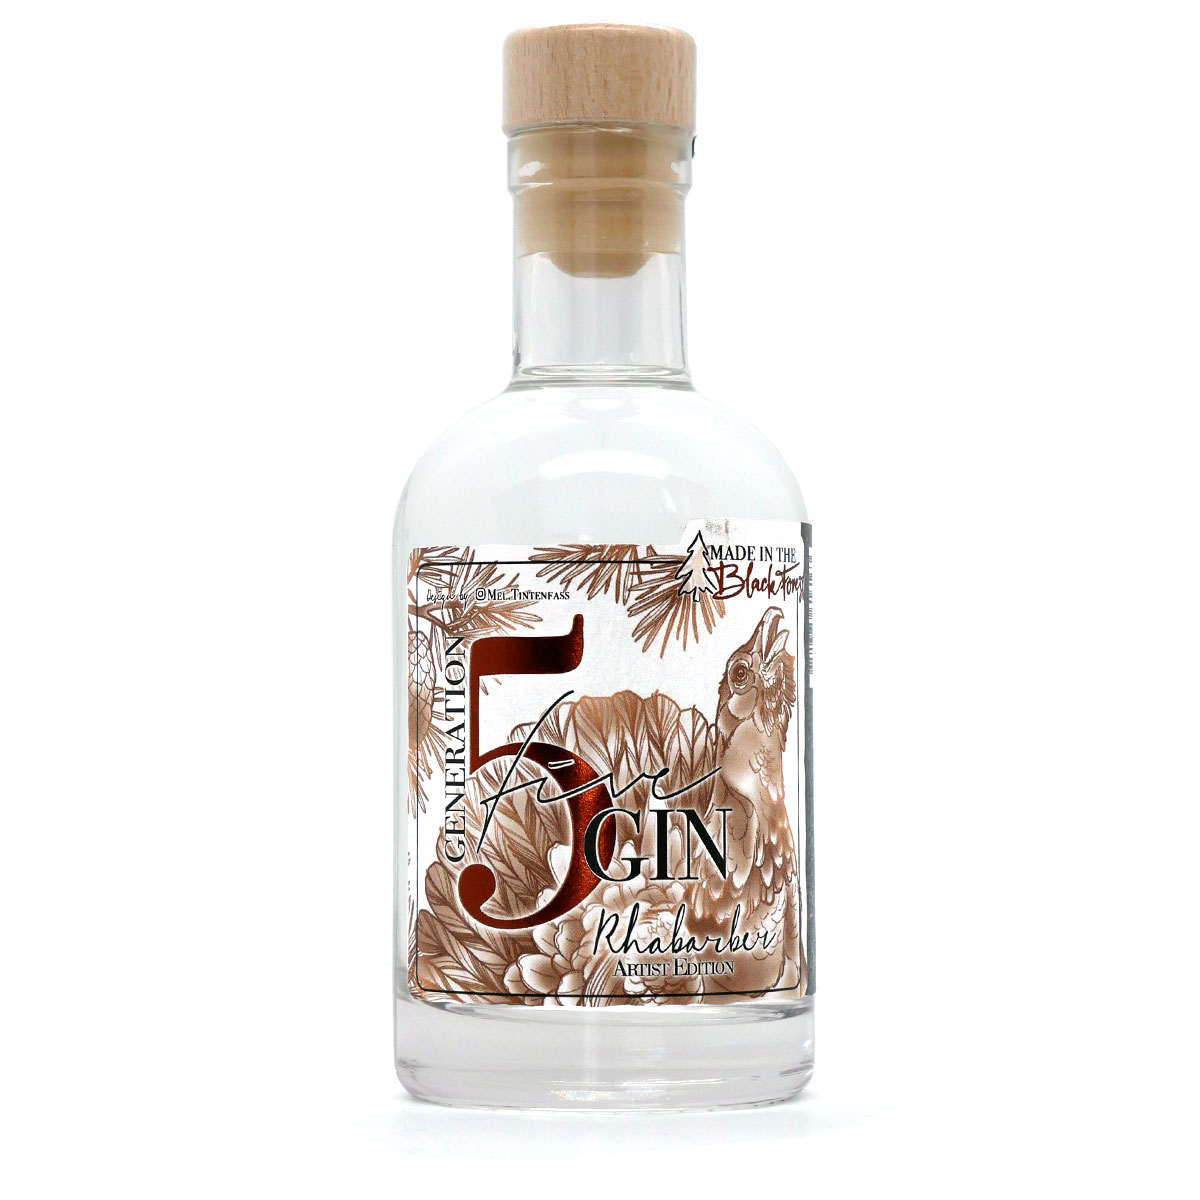 Black 5 BARREL Gin Gin - Forest The Generation